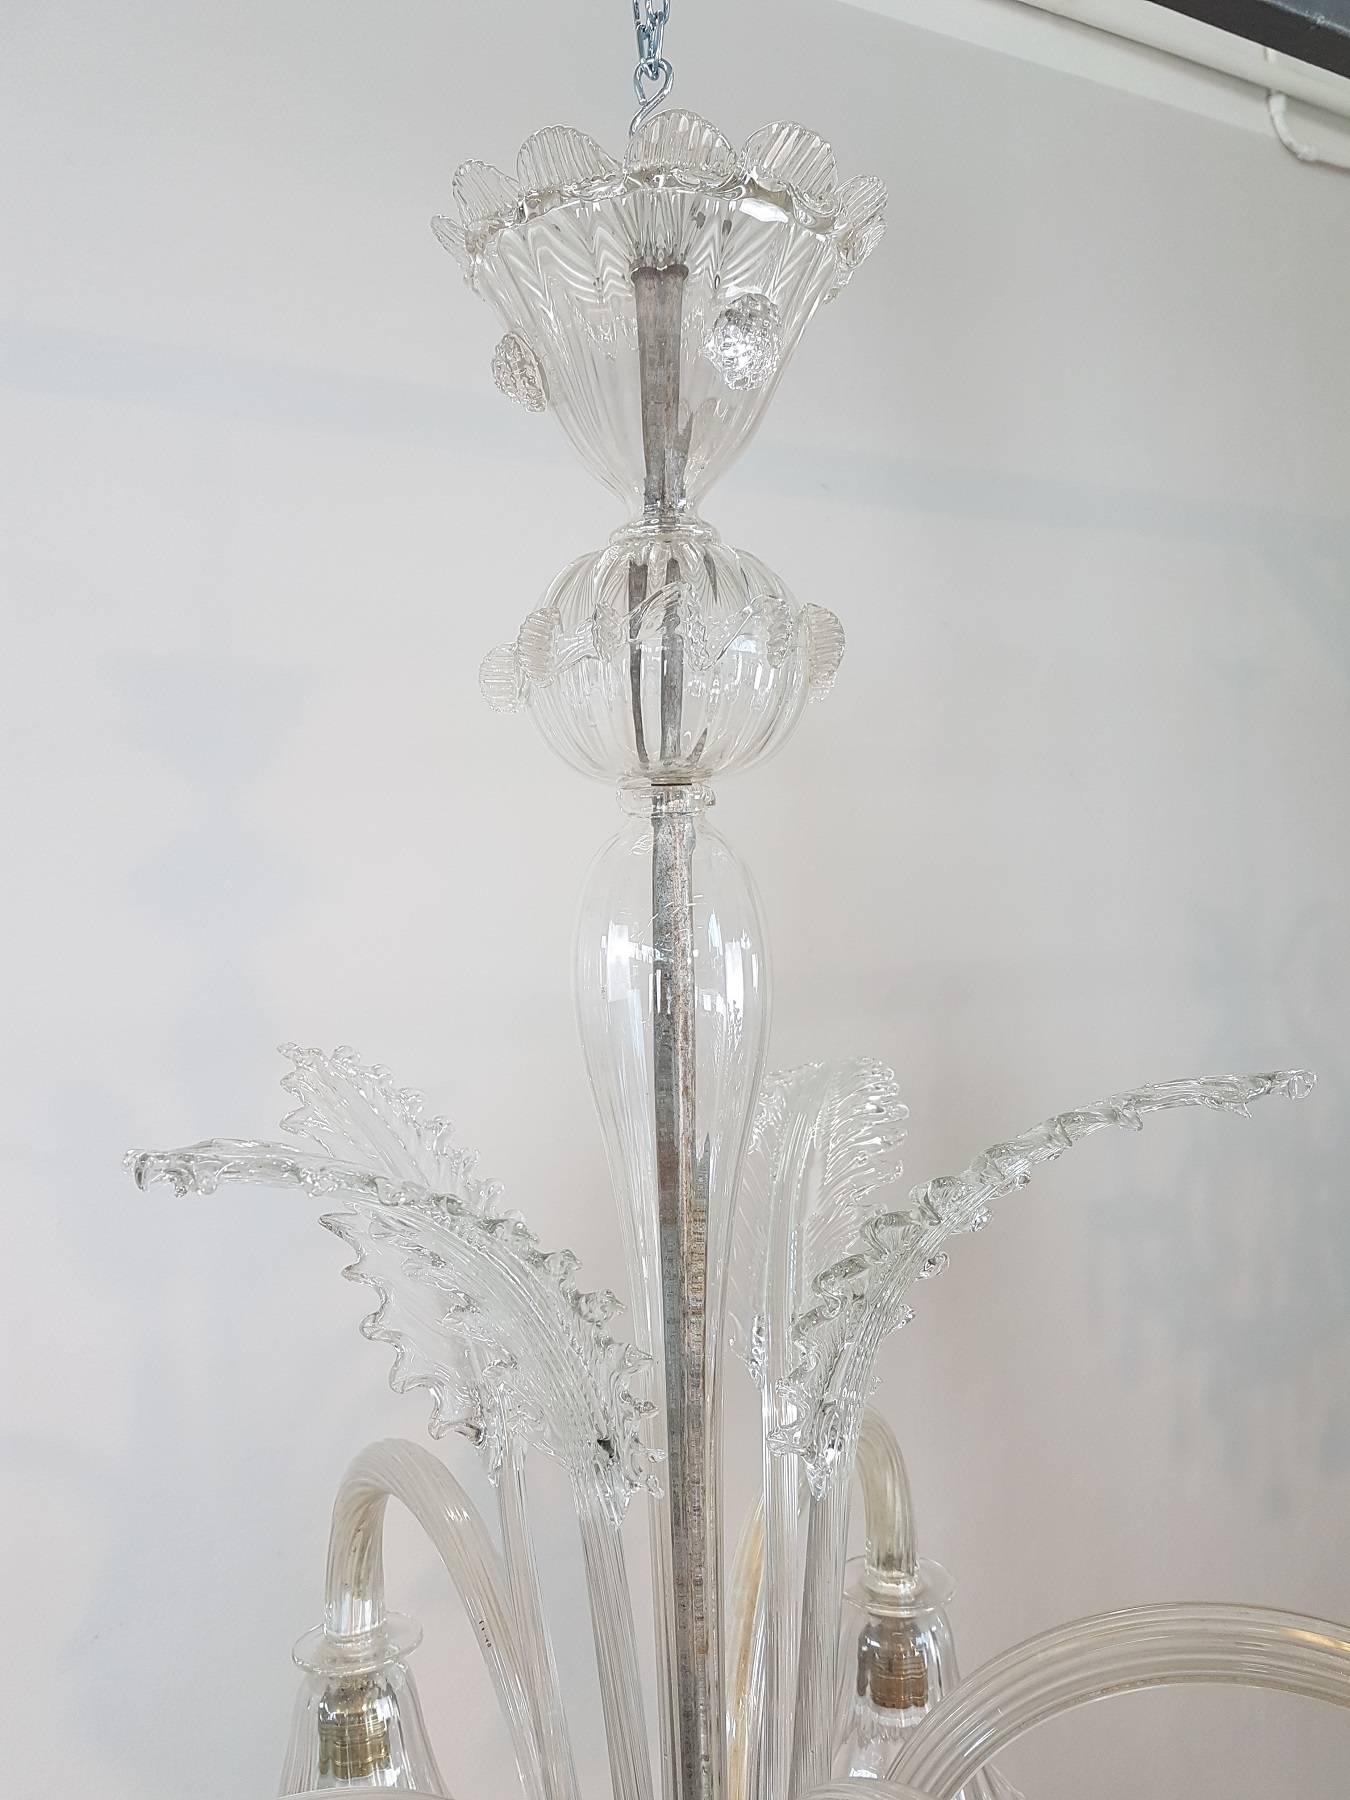 Beautiful and refined artistic glass chandelier of Murano 20th century, circa 1950s total five lights. The chandelier is made with the Classic artistic work of Murano glass in delicate and rare transparent glass.